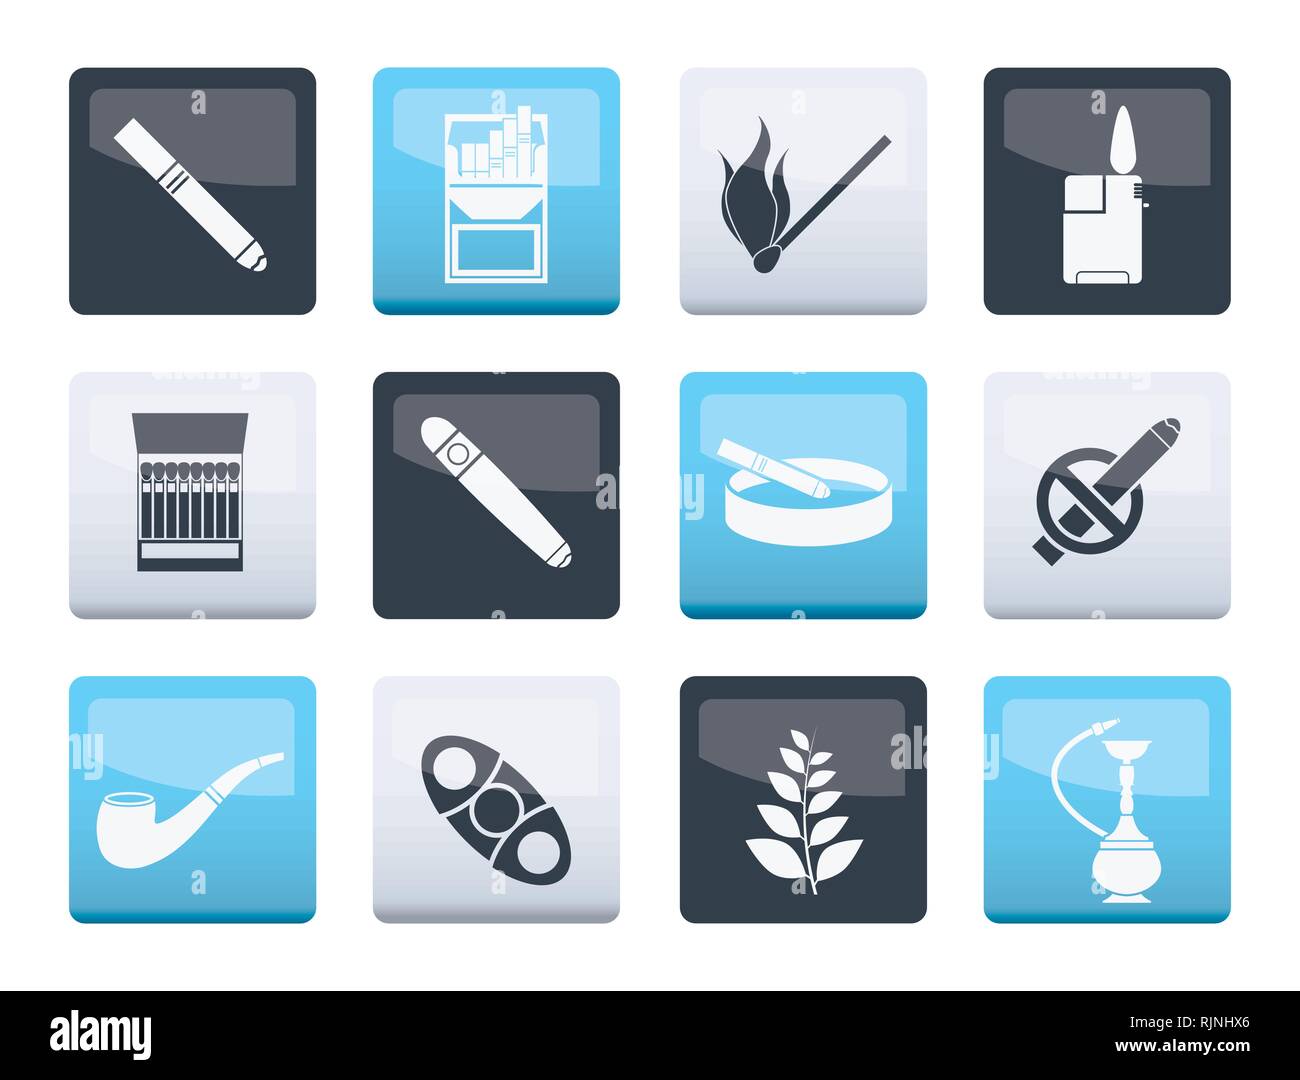 Smoking and cigarette icons over color background - vector icon set Stock Vector